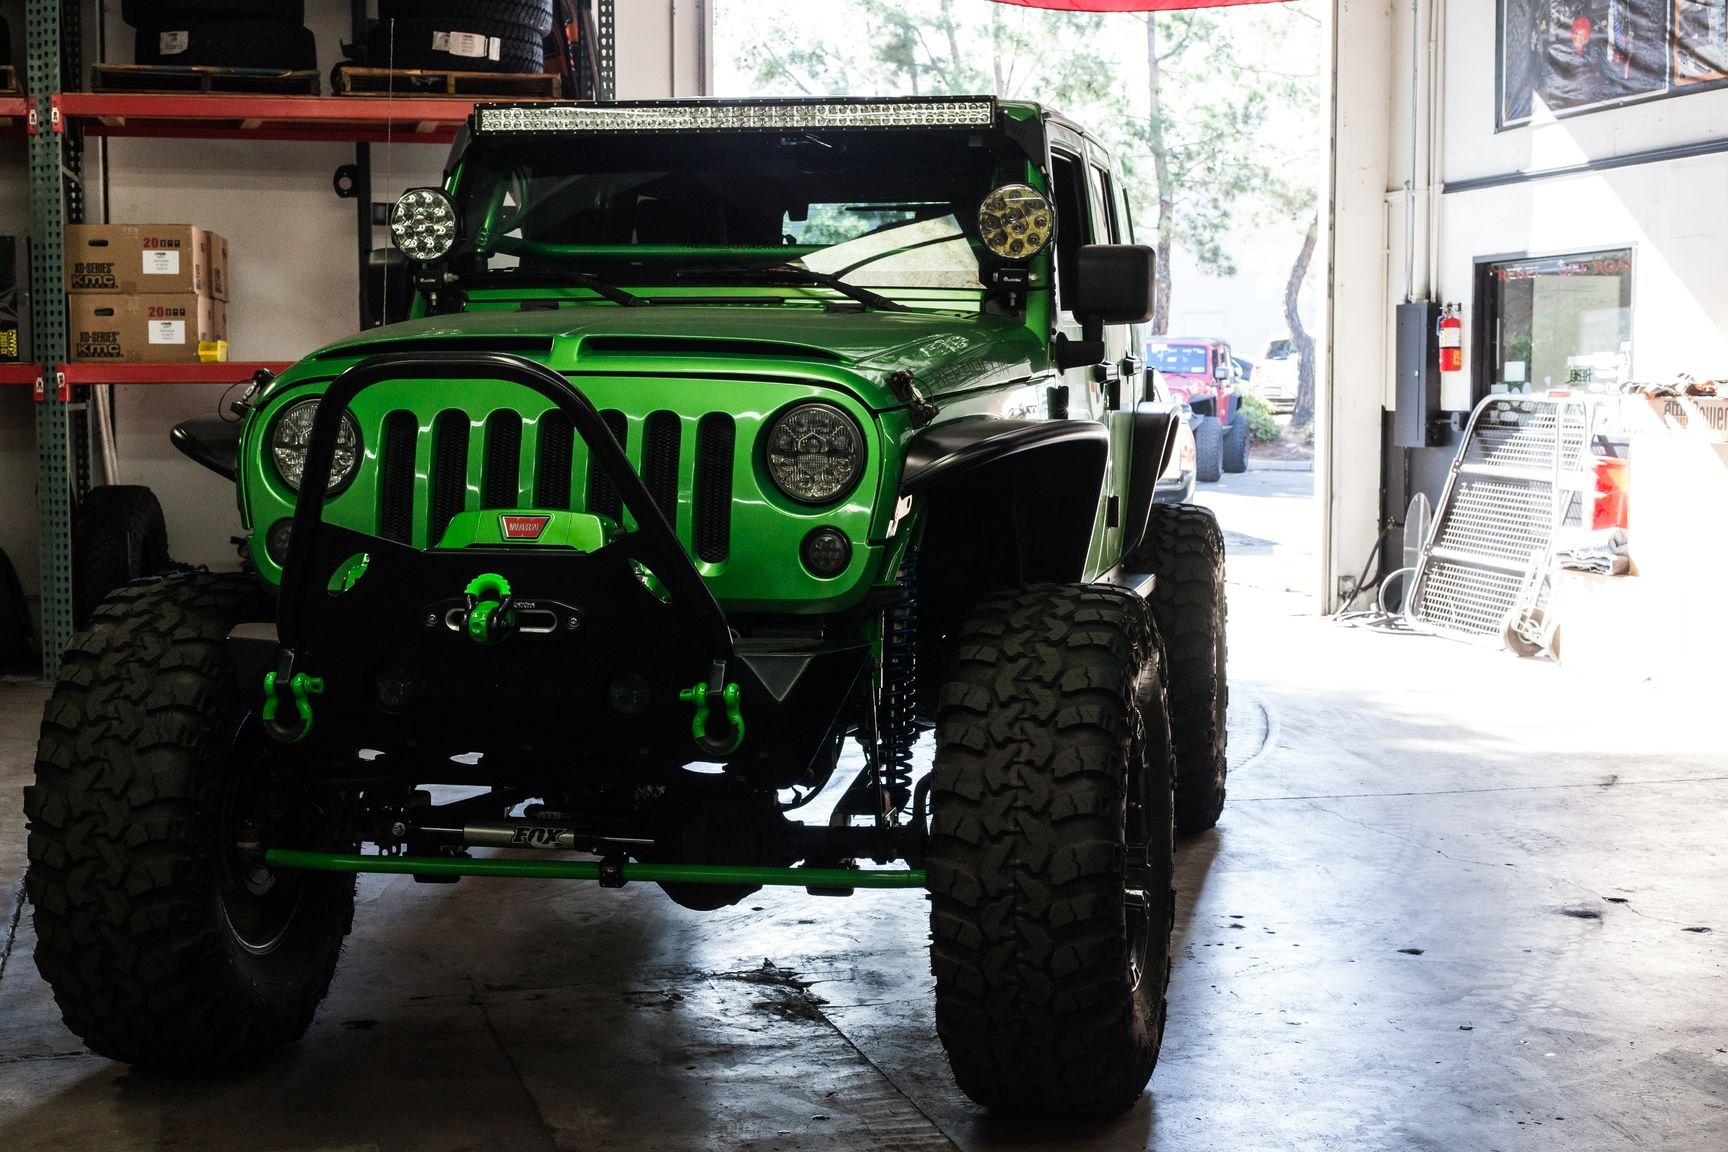 Emerald Green Lifted Jeep Wrangler Gets a Custom Vented Hood —   Gallery